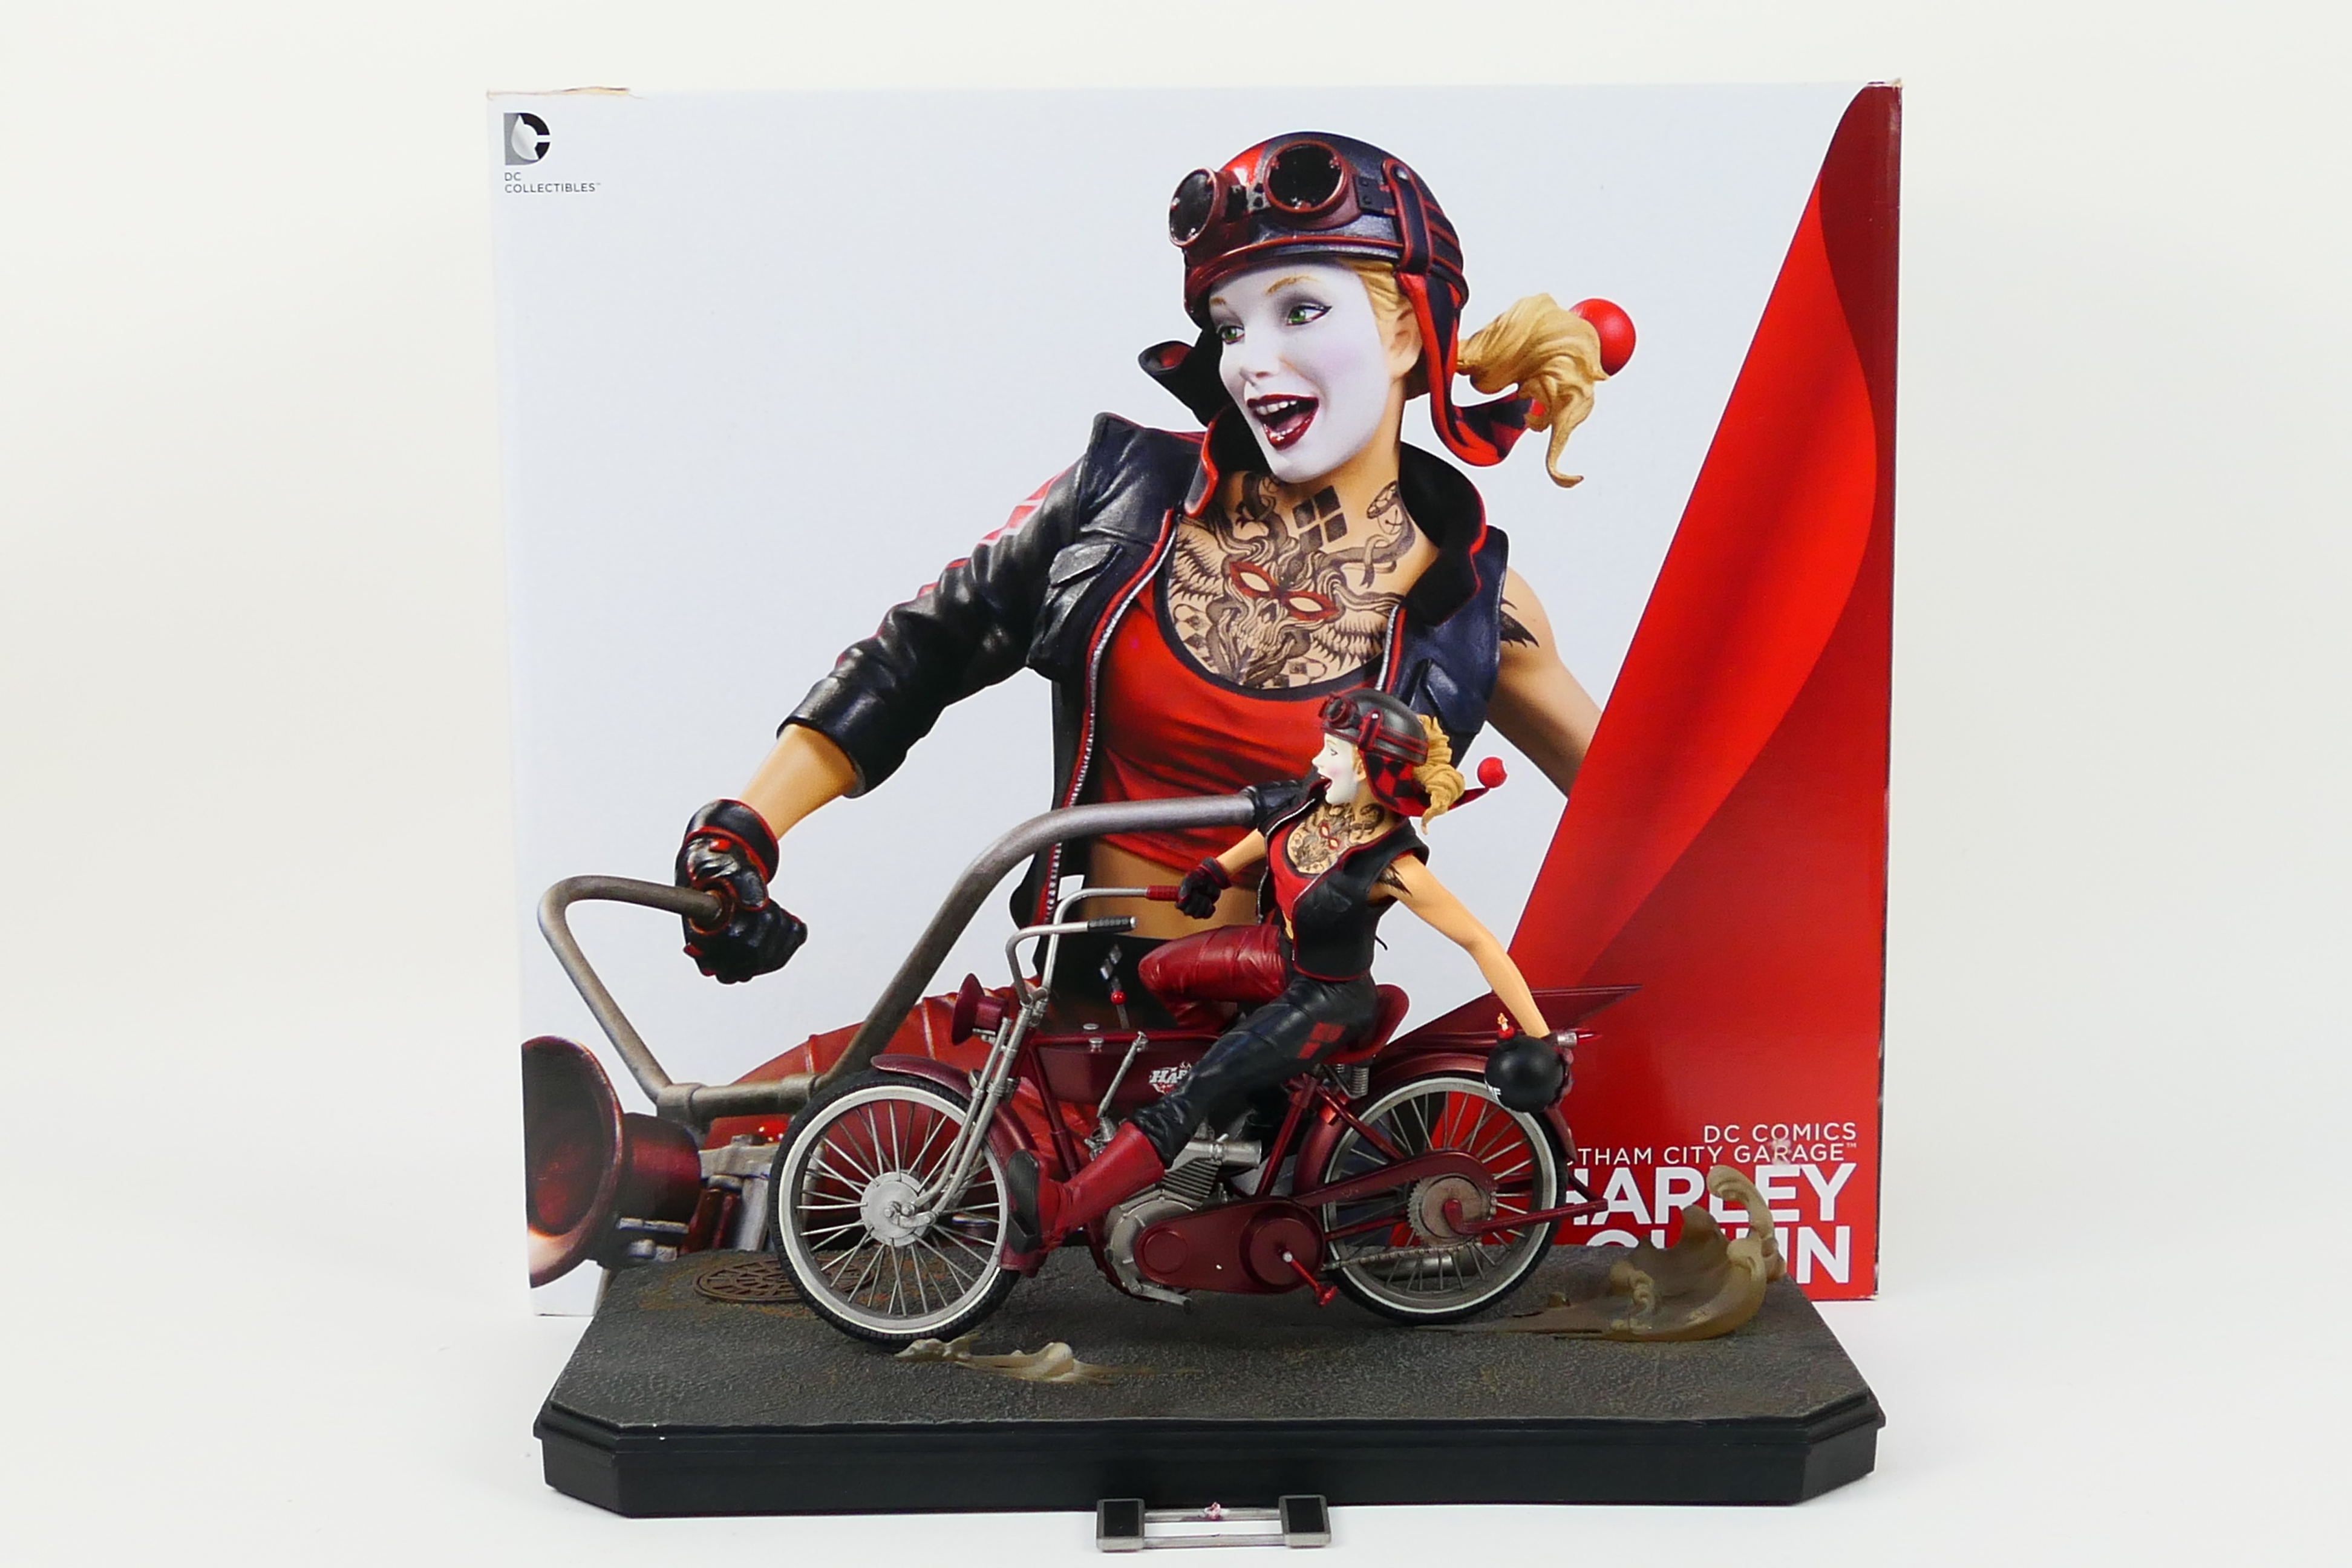 DC Collectibles - Harley Quinn - A limited edition Gotham City Garage Harley Quinn on motorcycle - Image 2 of 8